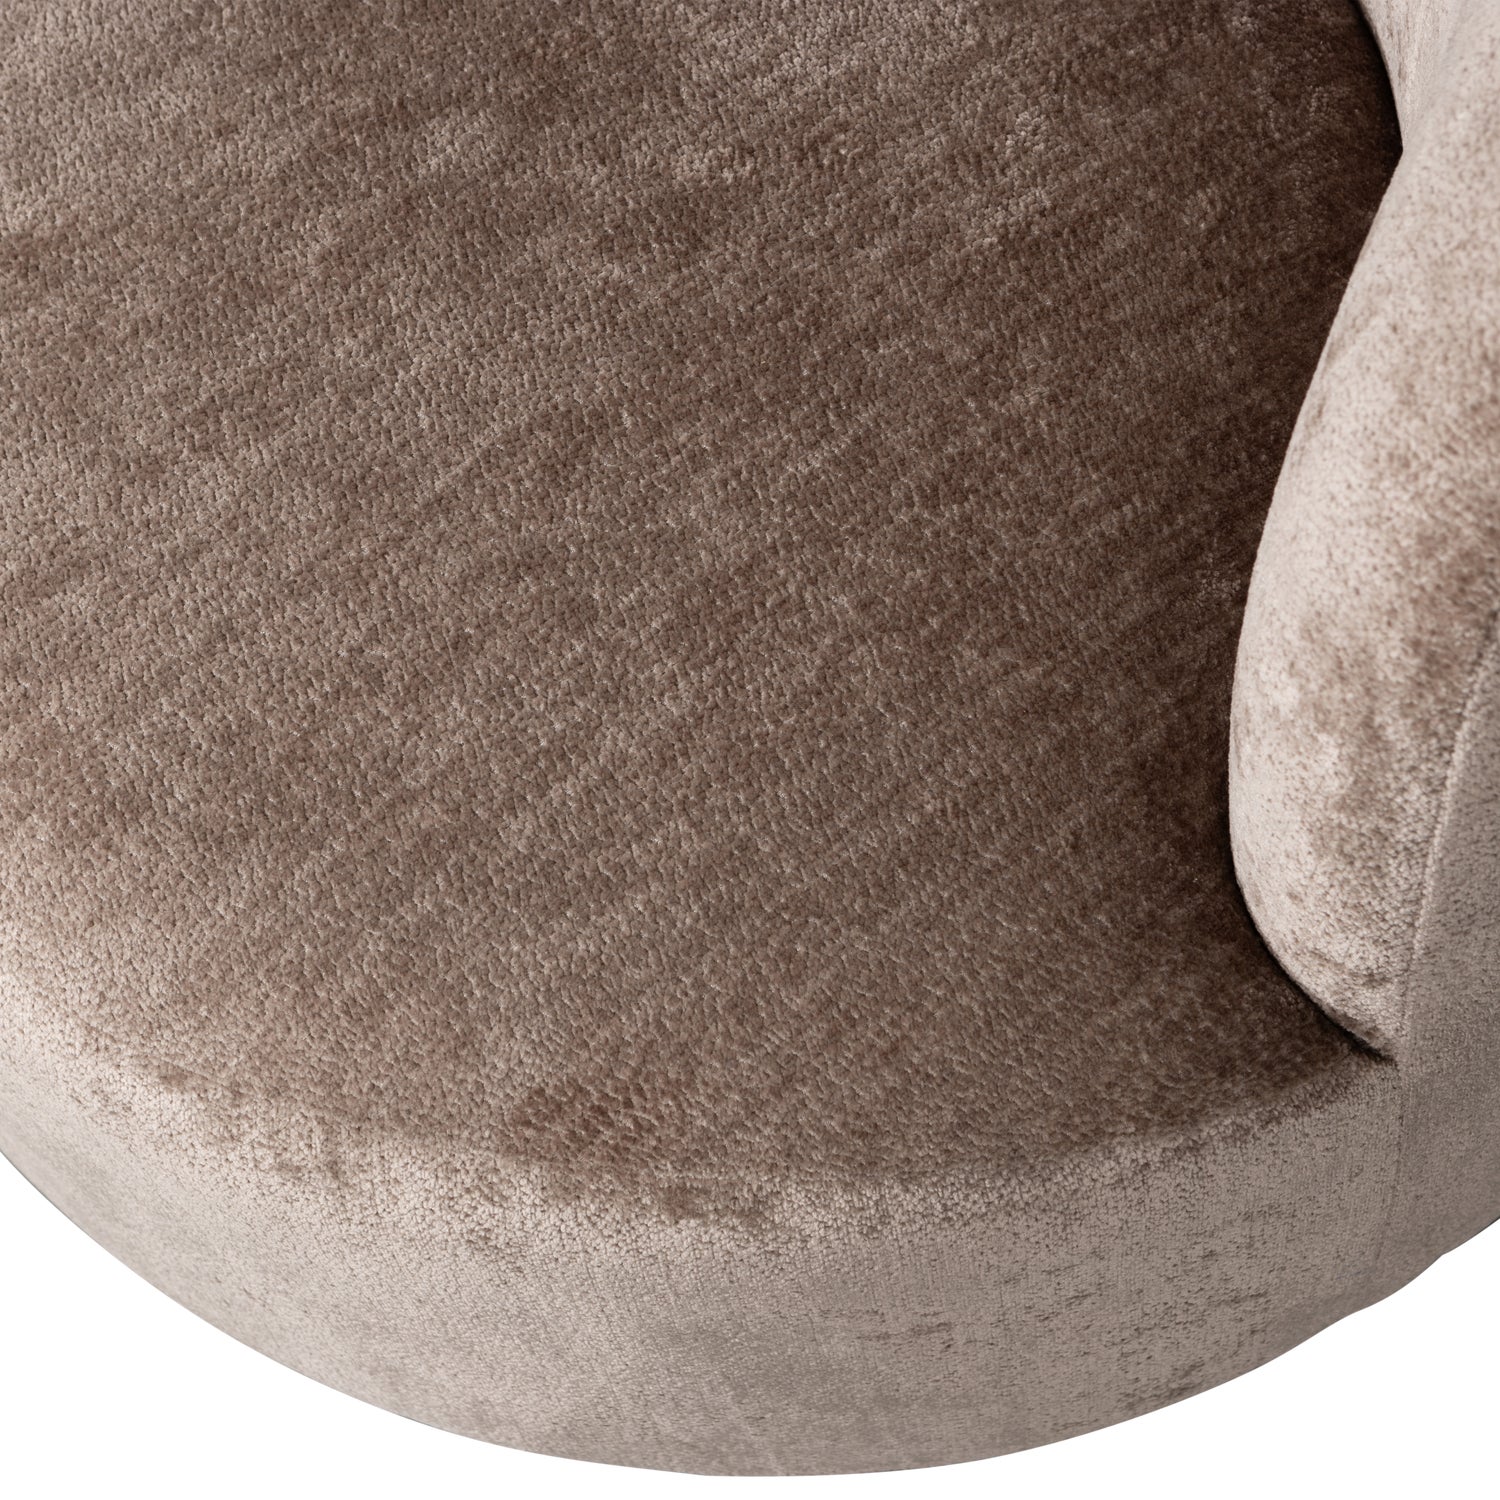 801440-T-01_VS_BP_Popular_fauteuil_taupe_detail.png?auto=webp&format=png&width=1500&height=1500